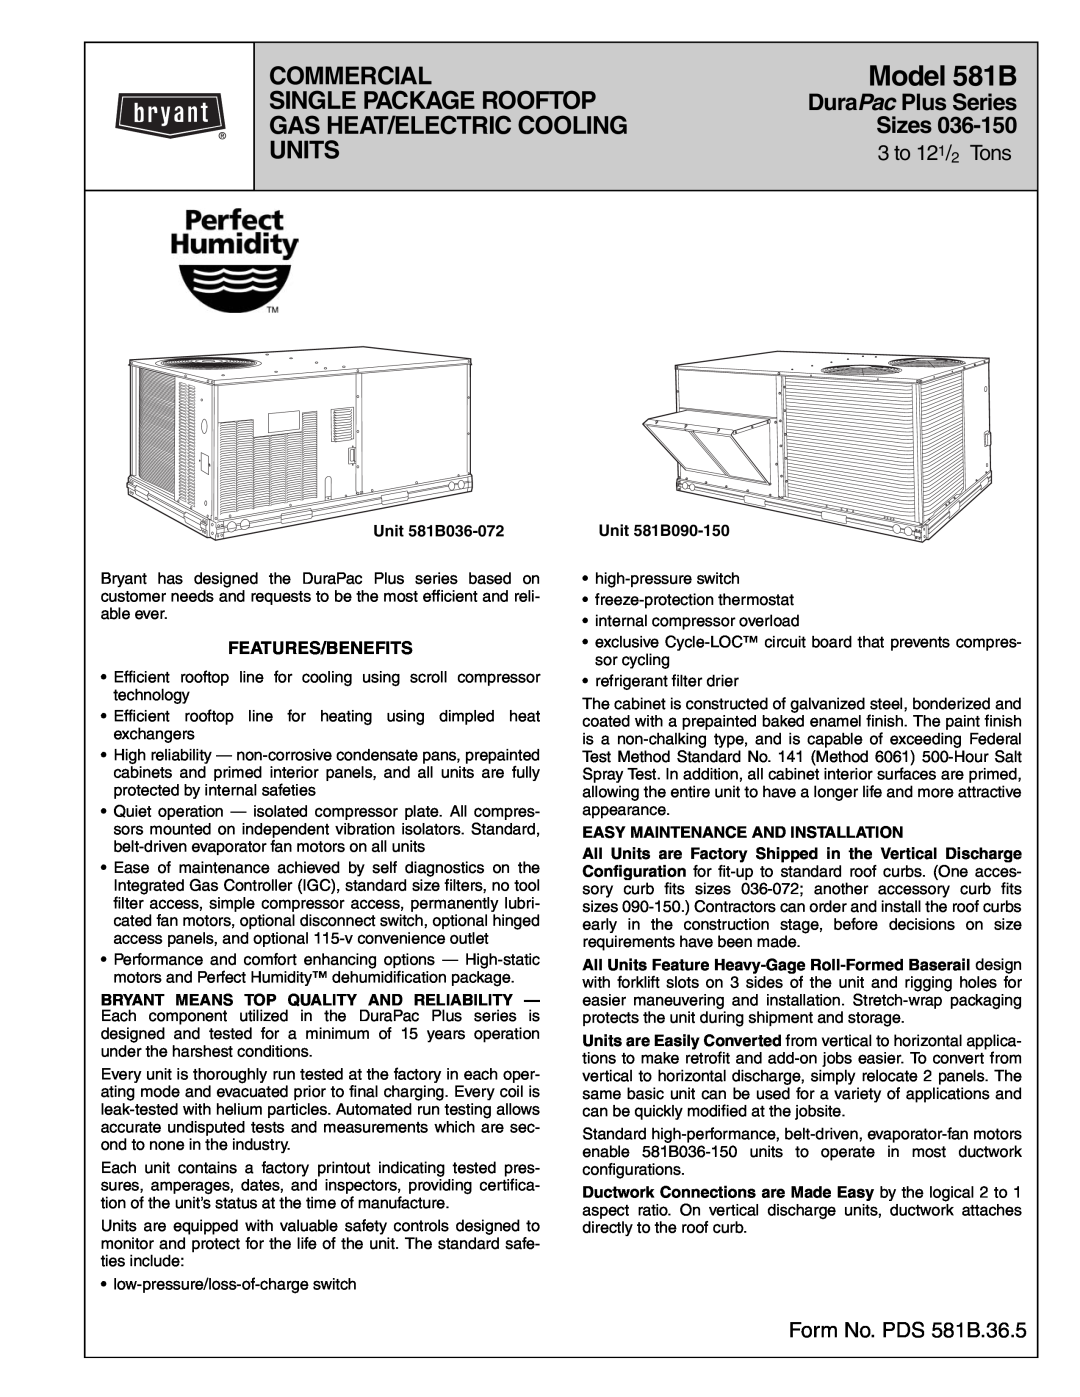 Bryant 581B installation instructions Important Ð Read Before Installing, Contents, Safety Considerations, Ð Typical Unit 